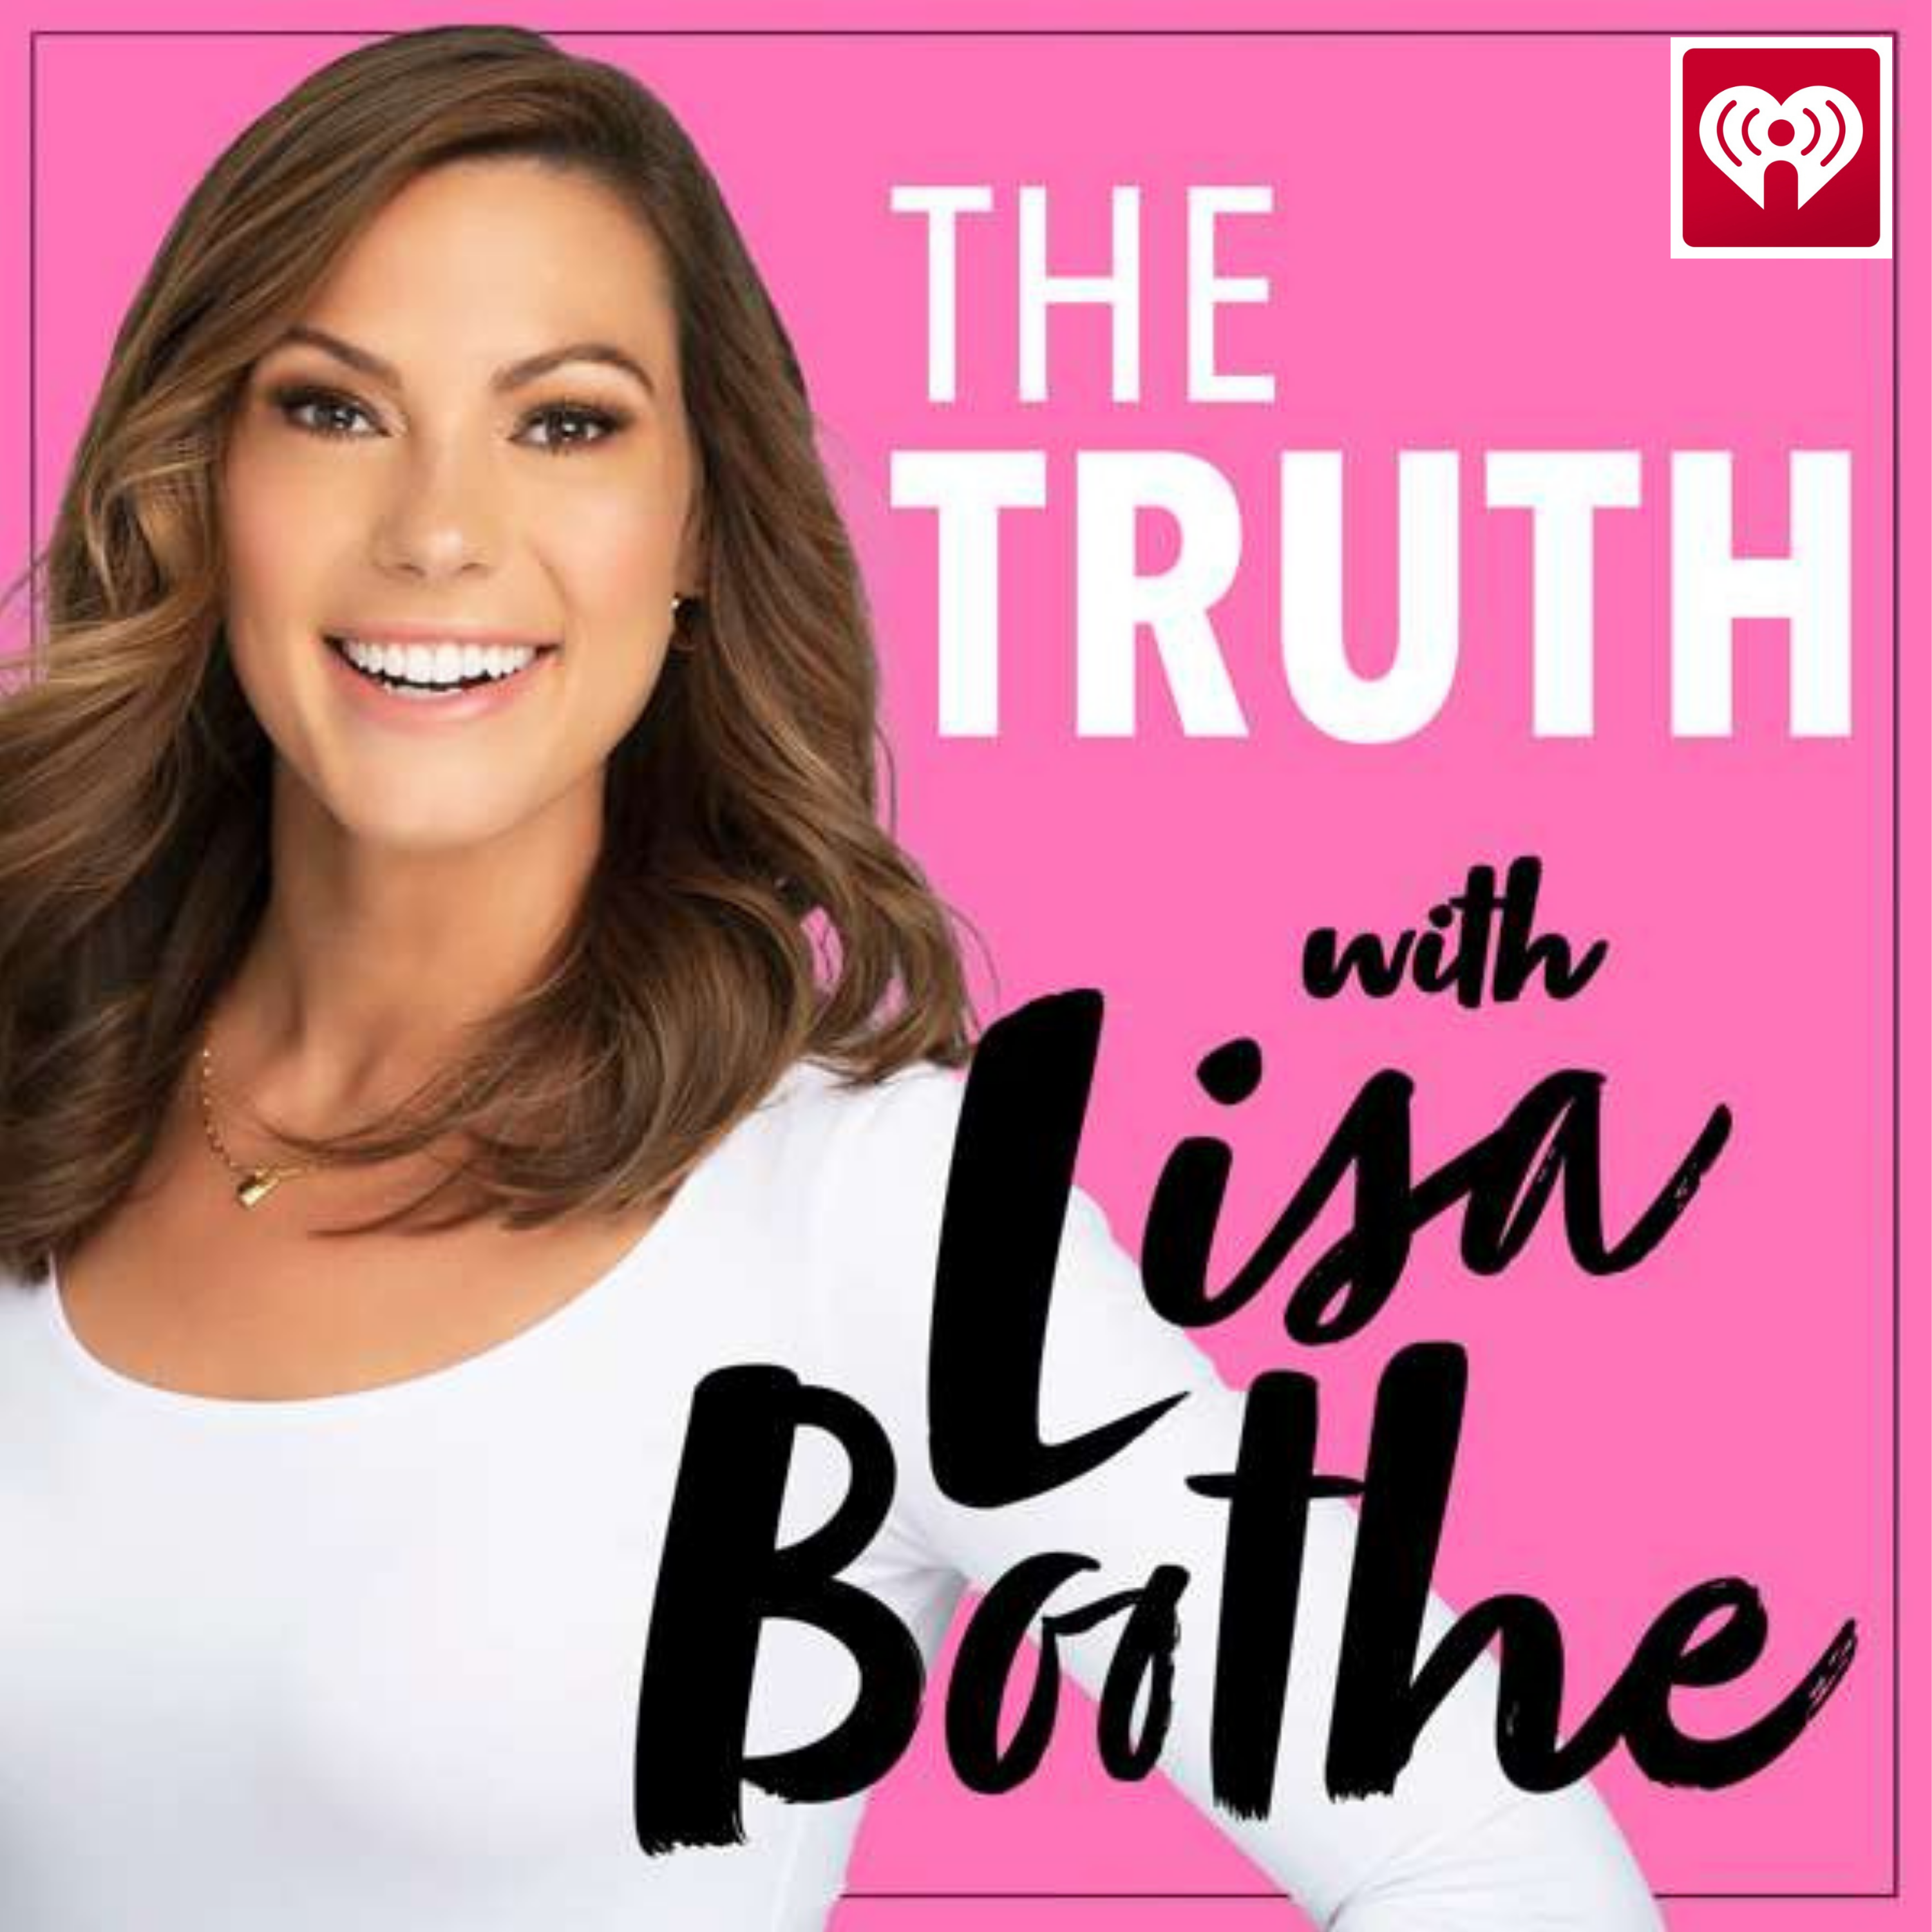 The Truth with Lisa Boothe: What Happened to Law & Order with Paul Mauro